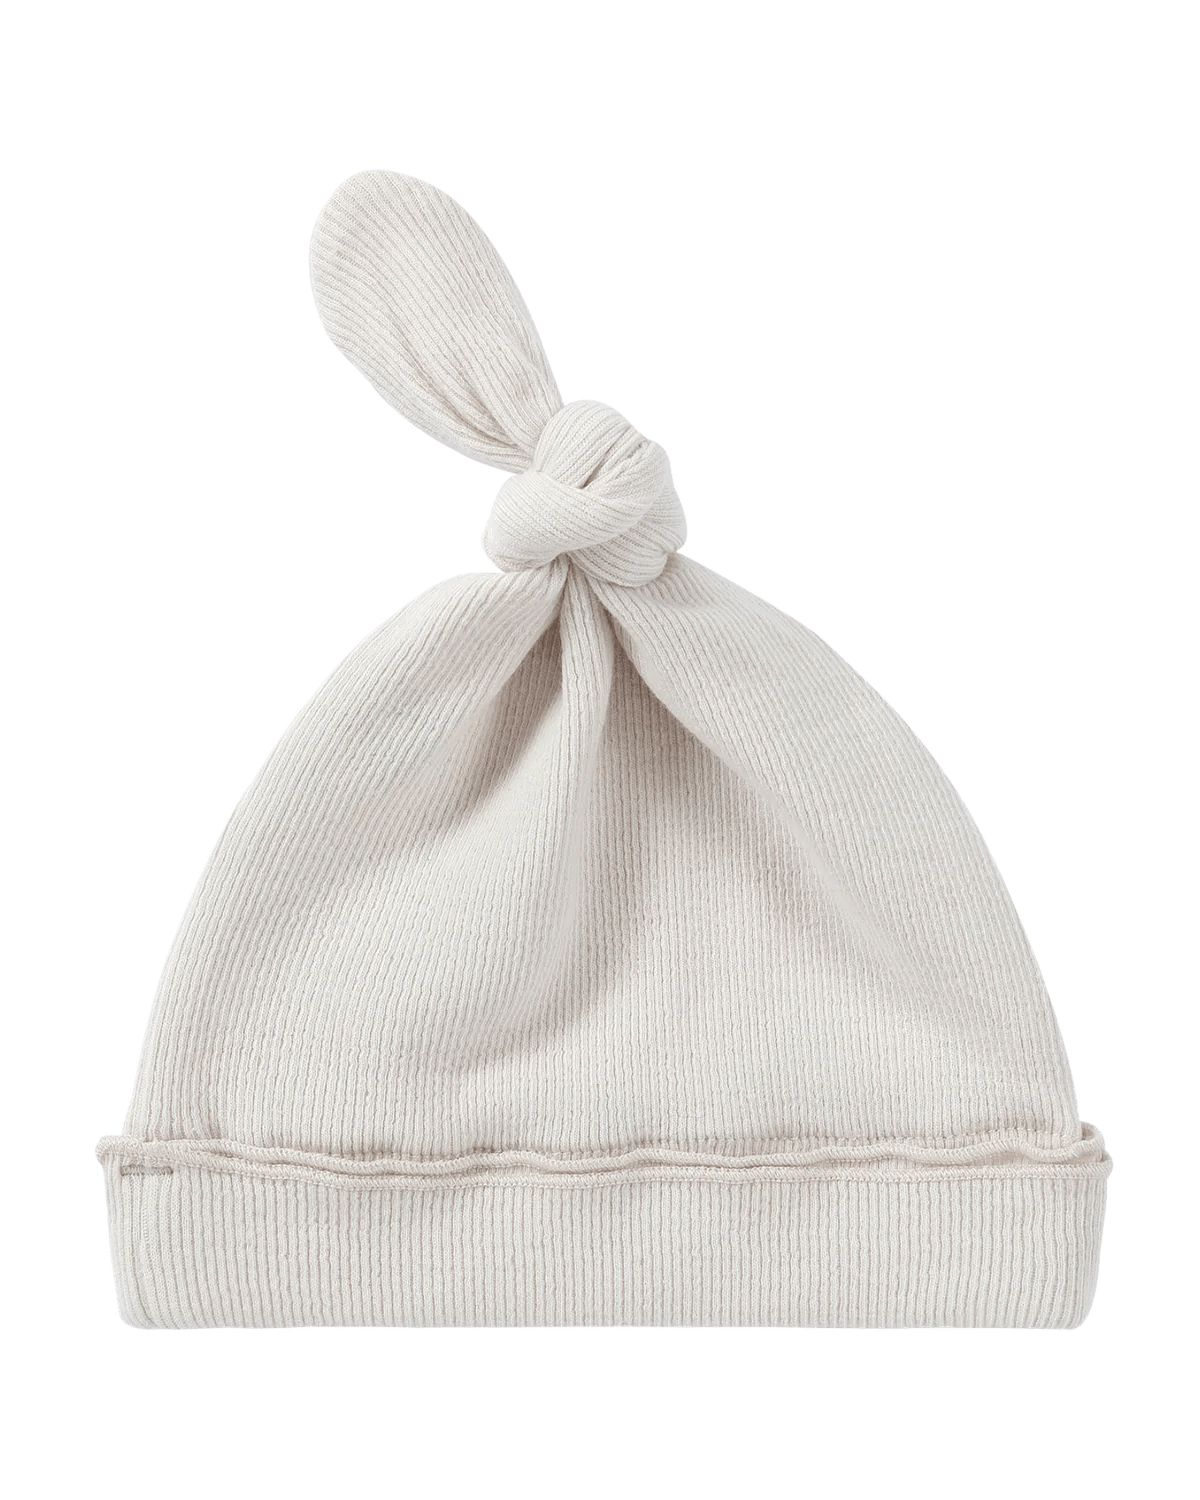 Organic Knotted Baby Hat - EggShell and Salt by Susukoshi